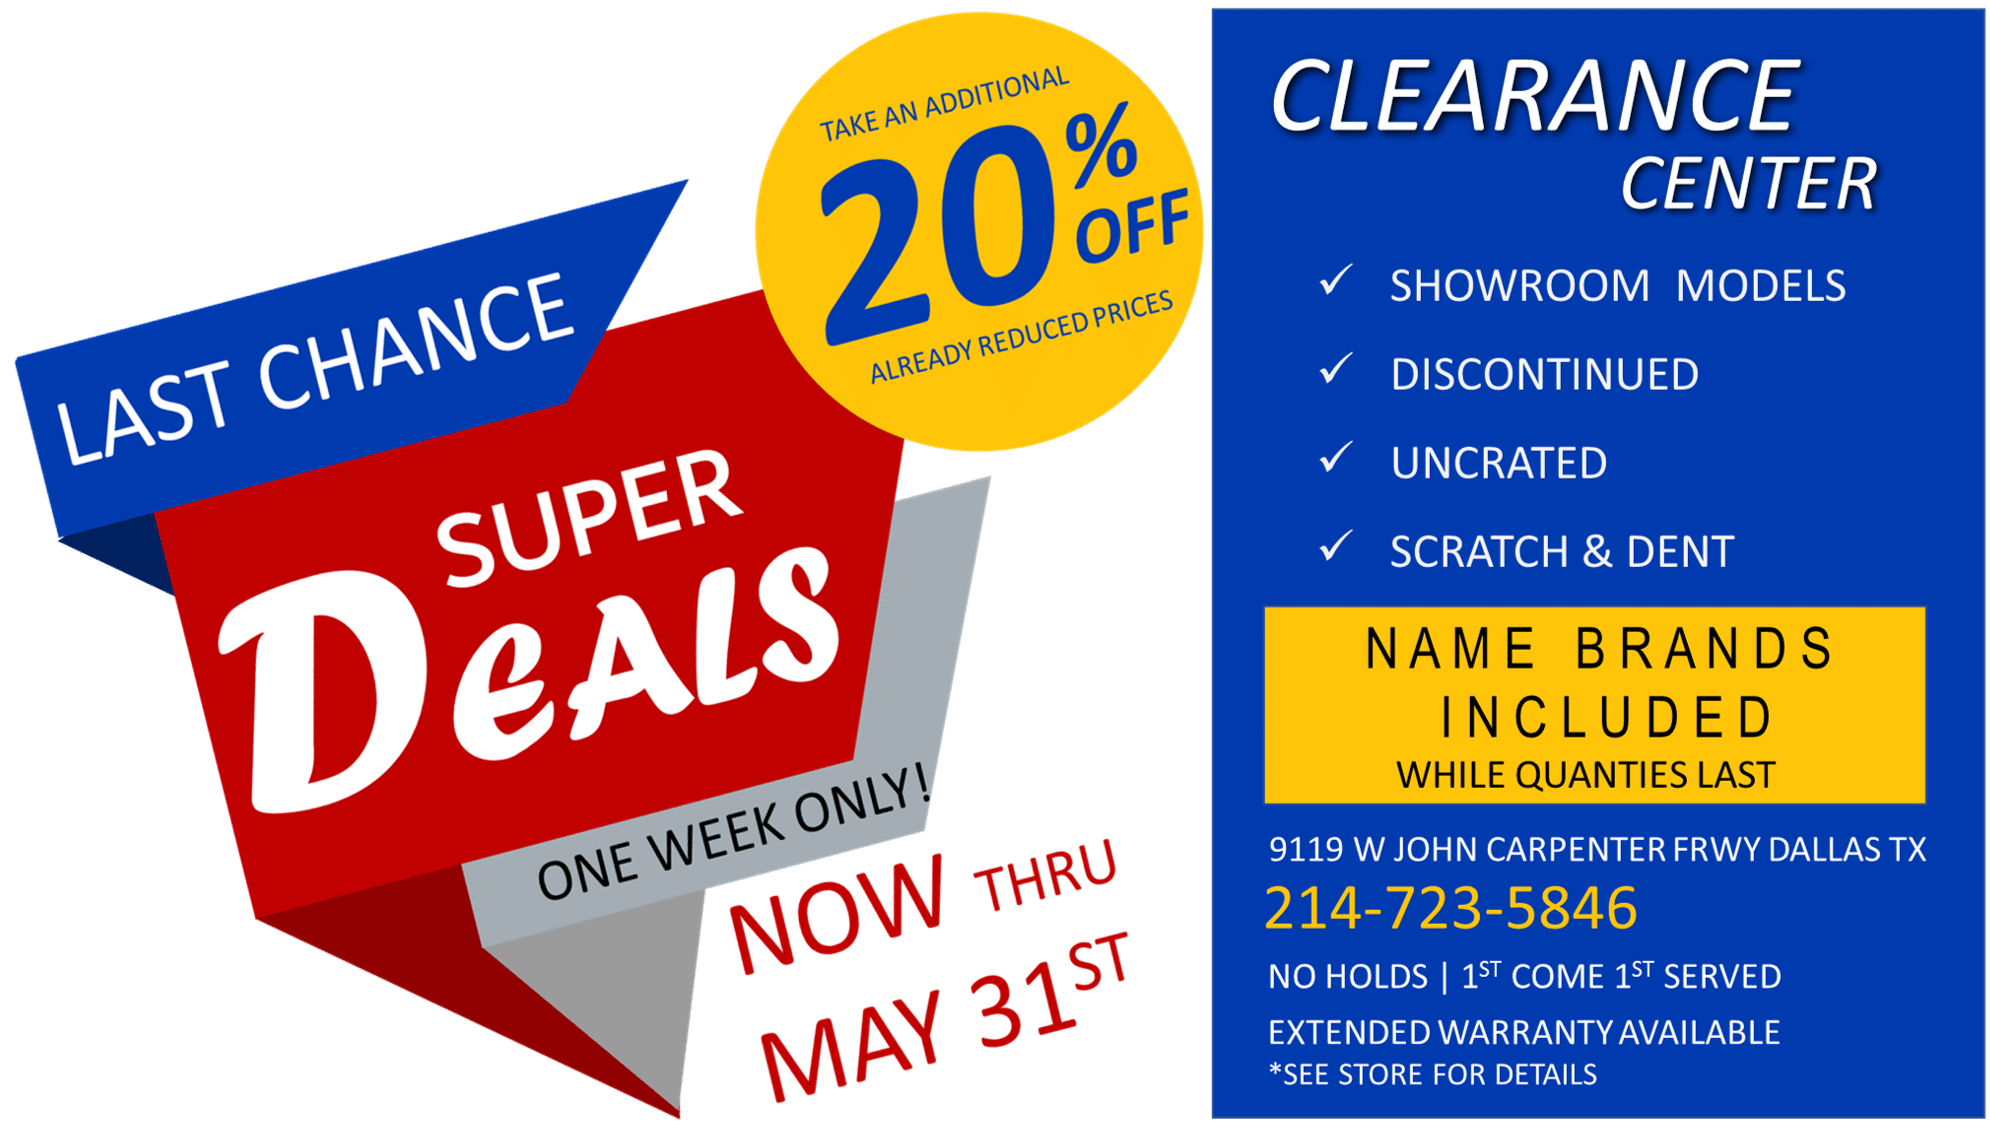 LAST CHANCE to SAVE! Extra 20% Off ends May 31st! - Capital